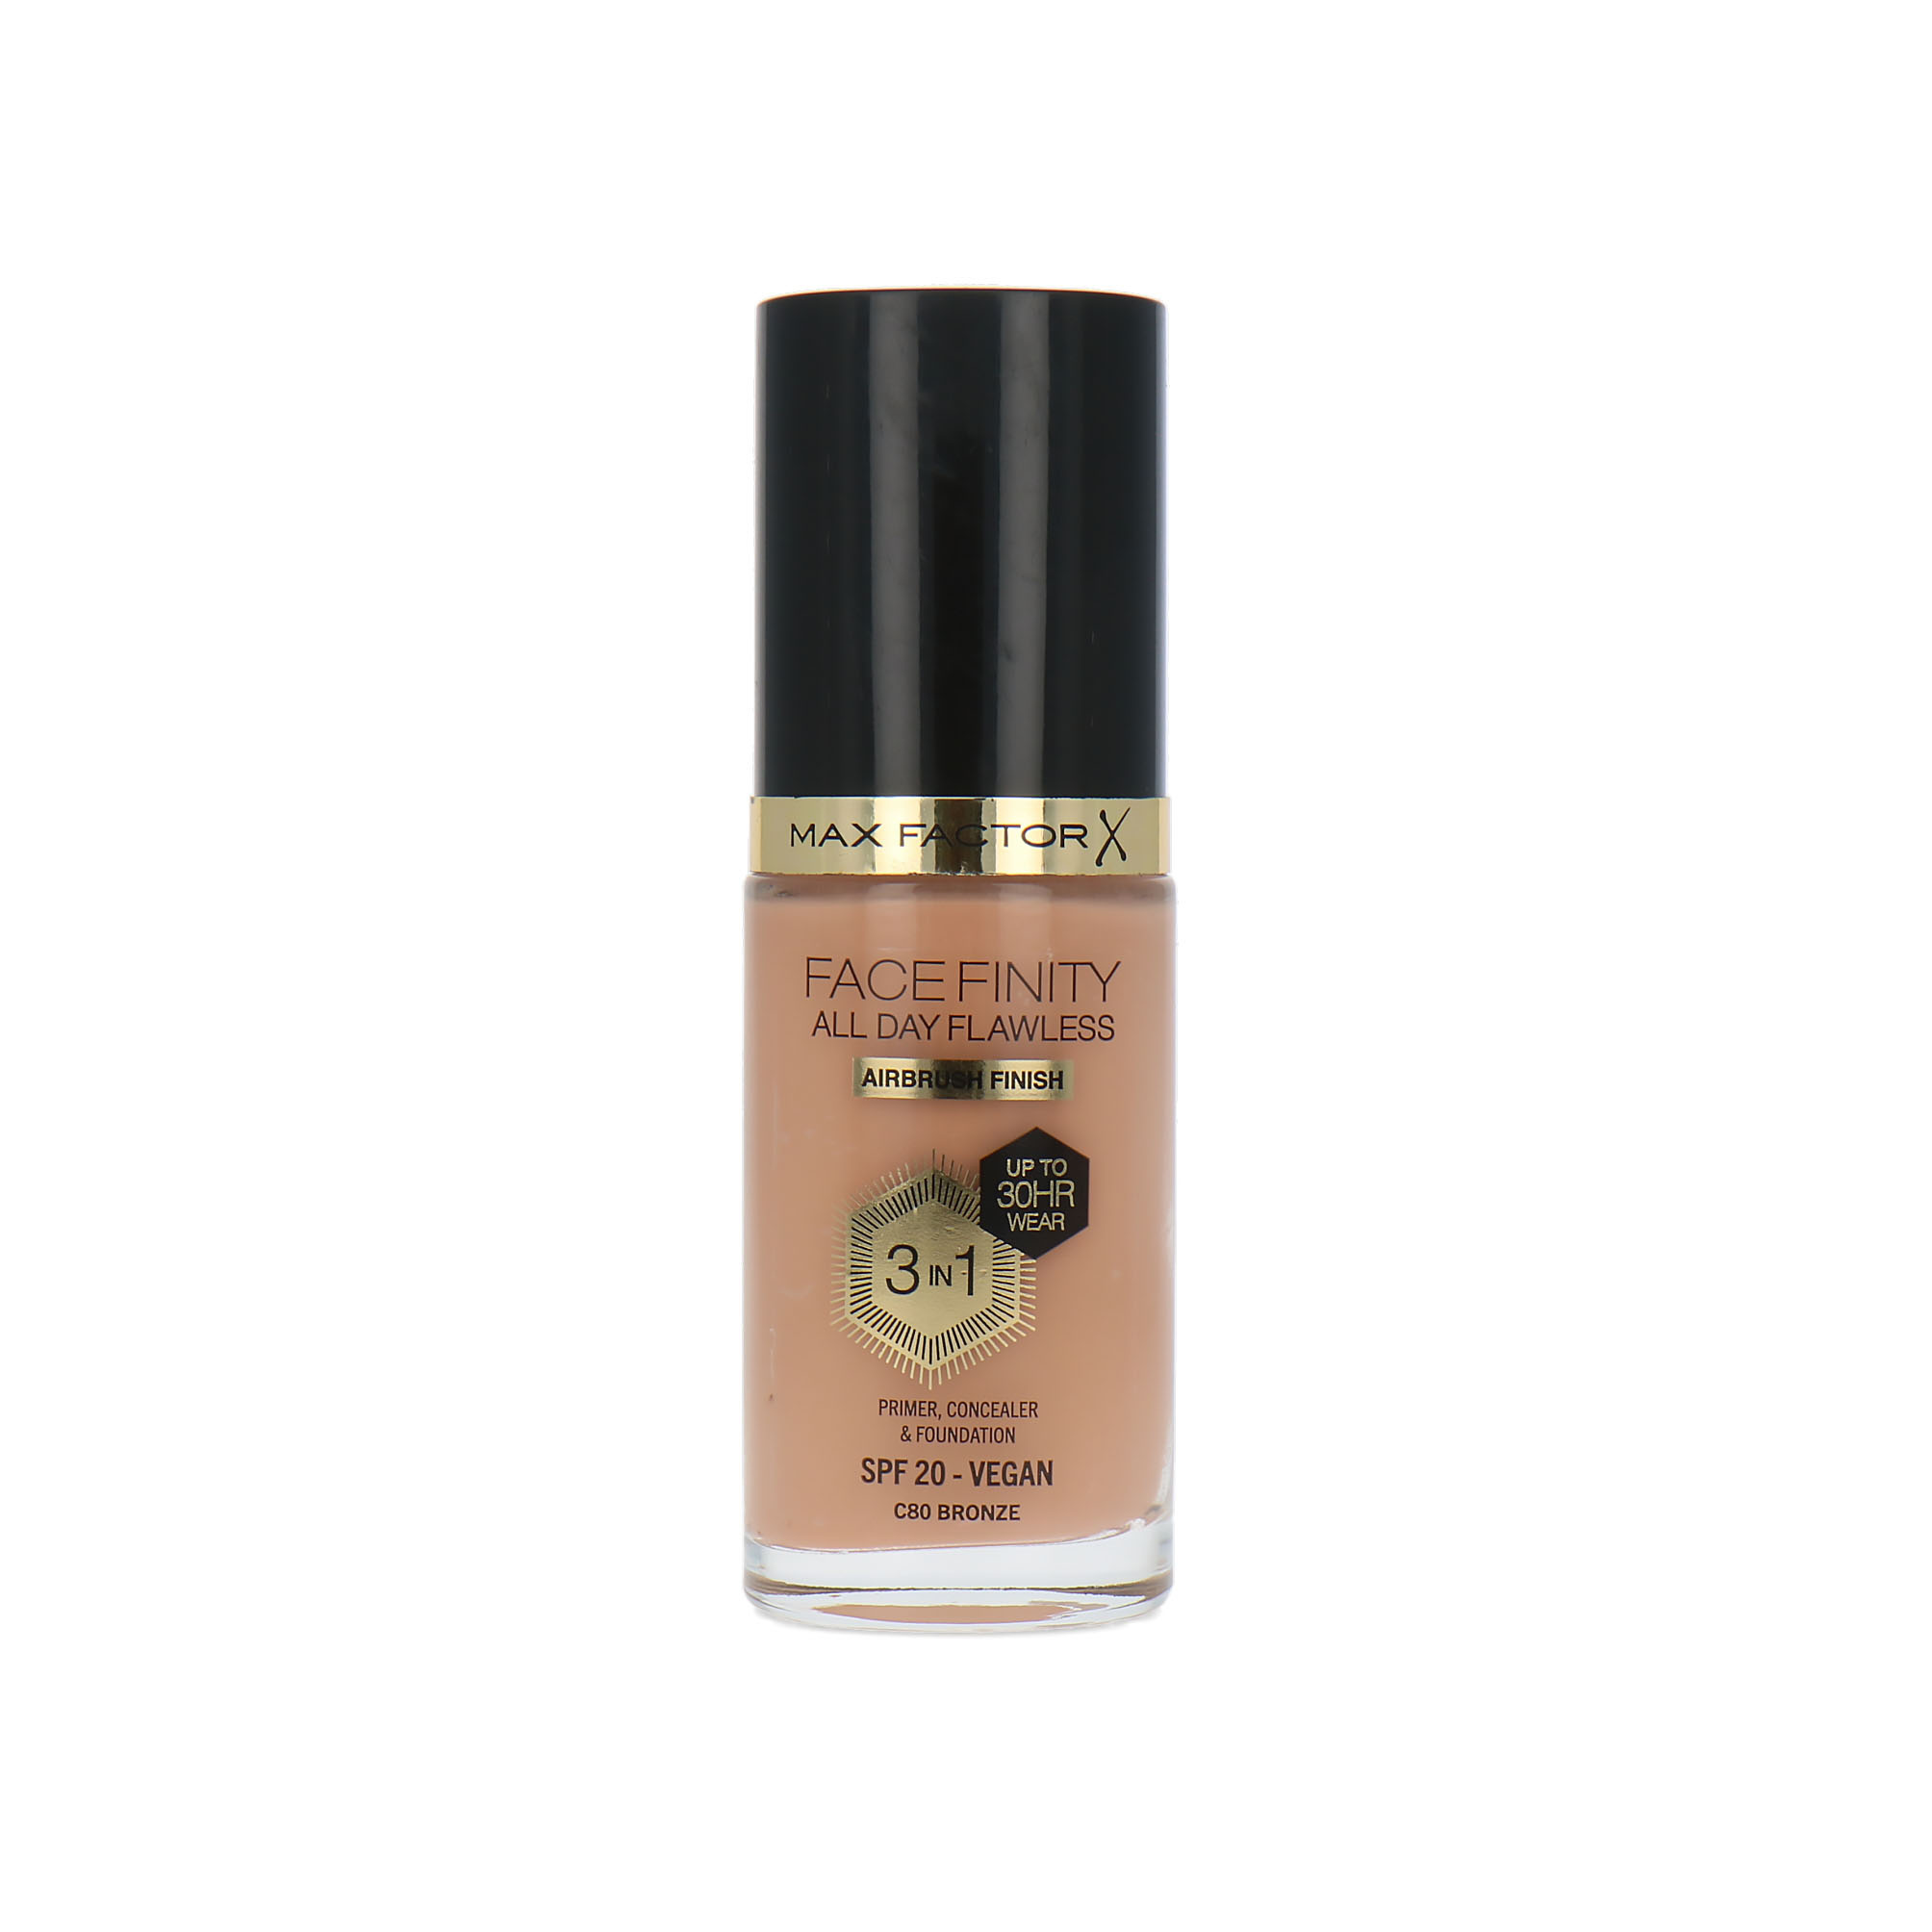 Max Factor Facefinity All Day Flawless 3 in 1 30H Airbrush Finish Fond de teint - C80 Bronze